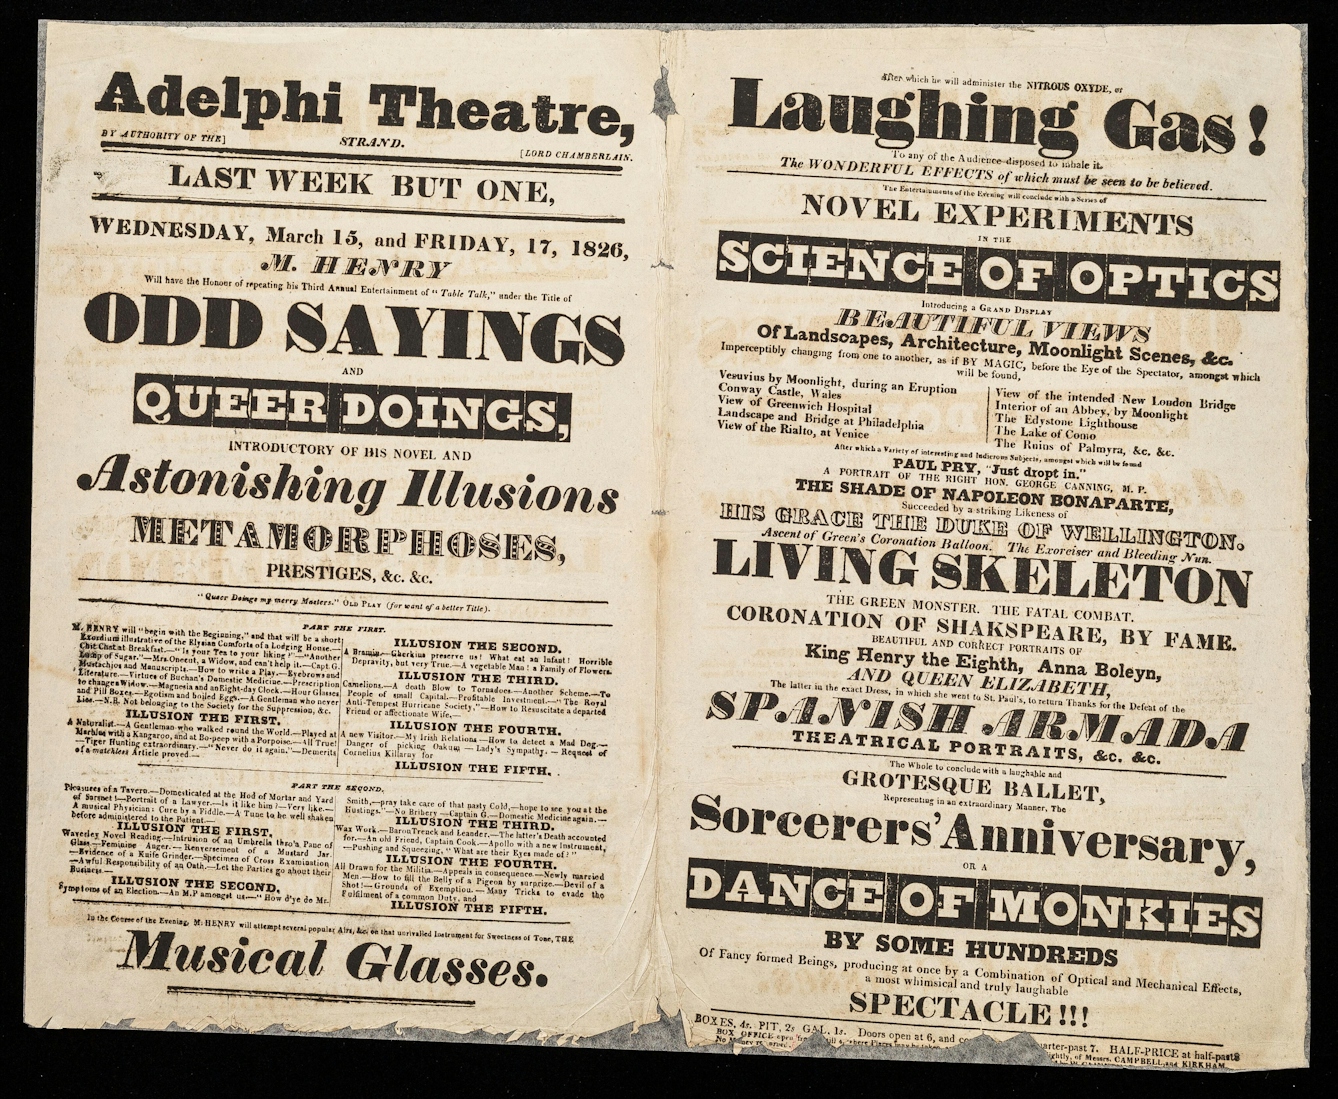 A crudely printed advertising leaflet for the Adelphi Theatre, Strand, London promoting different spectacles including Odd Sayiings and Queer Doings, Laughing Gas, Novel Experiments of the Science of Optics and a Living Skeleton.